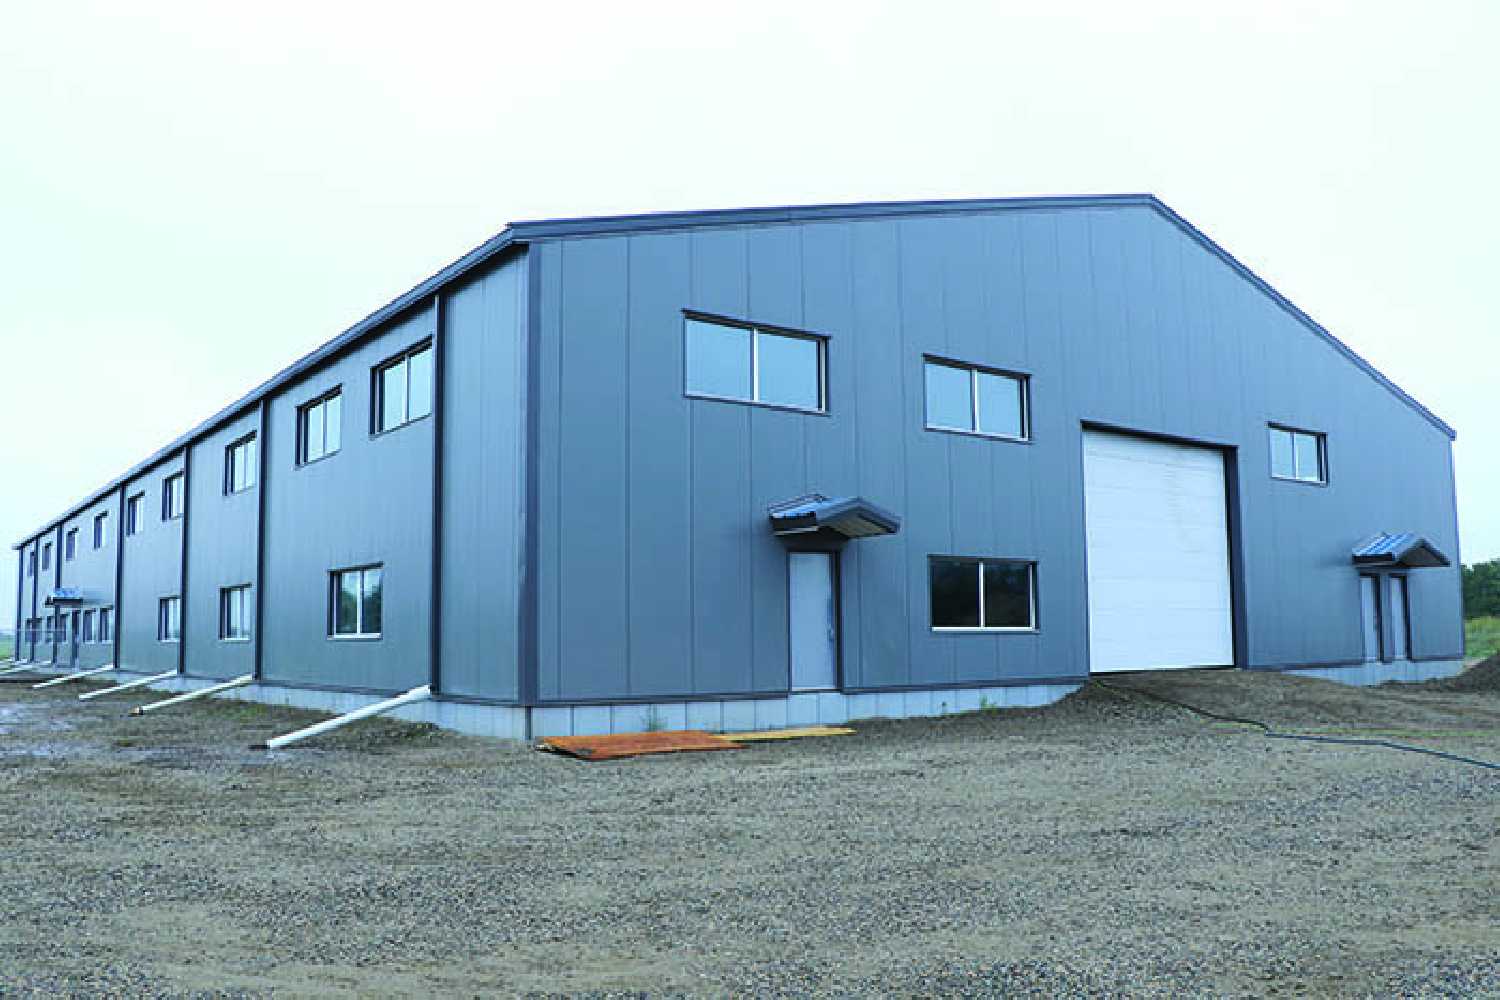 The first two phases for the Town of Esterhazy’s $30 million regional water system project have been completed, which involved the superstructure and the civil works.